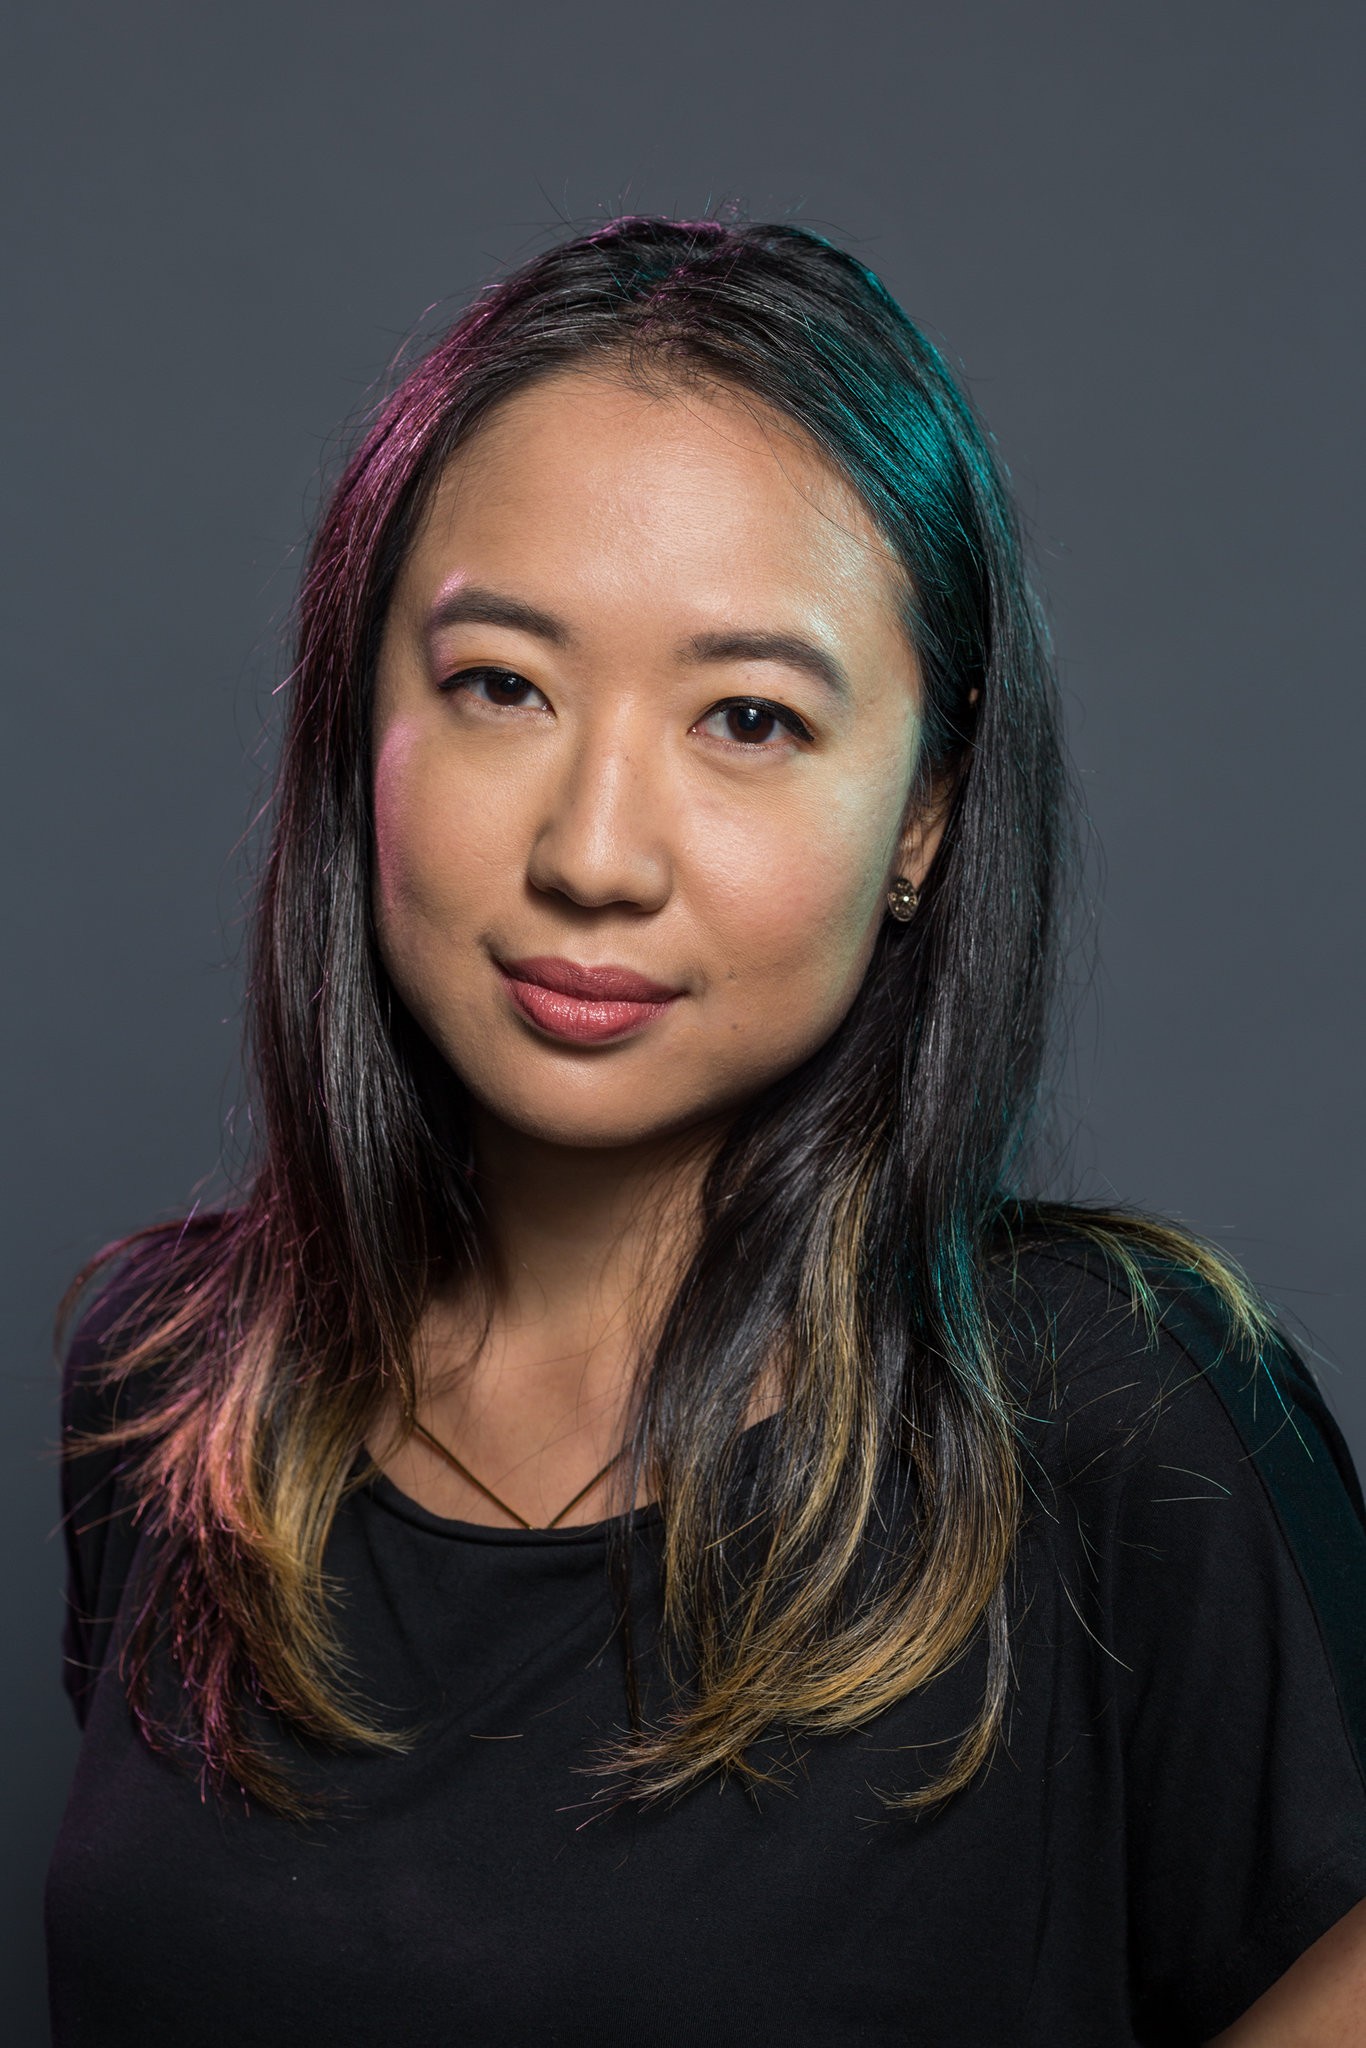 Tech journalist Sarah Jeong. After The New York Times announced that Jeong would be joining its editorial board, detractors combed her Twitter, using old tweets to accuse her of being racist against white people 